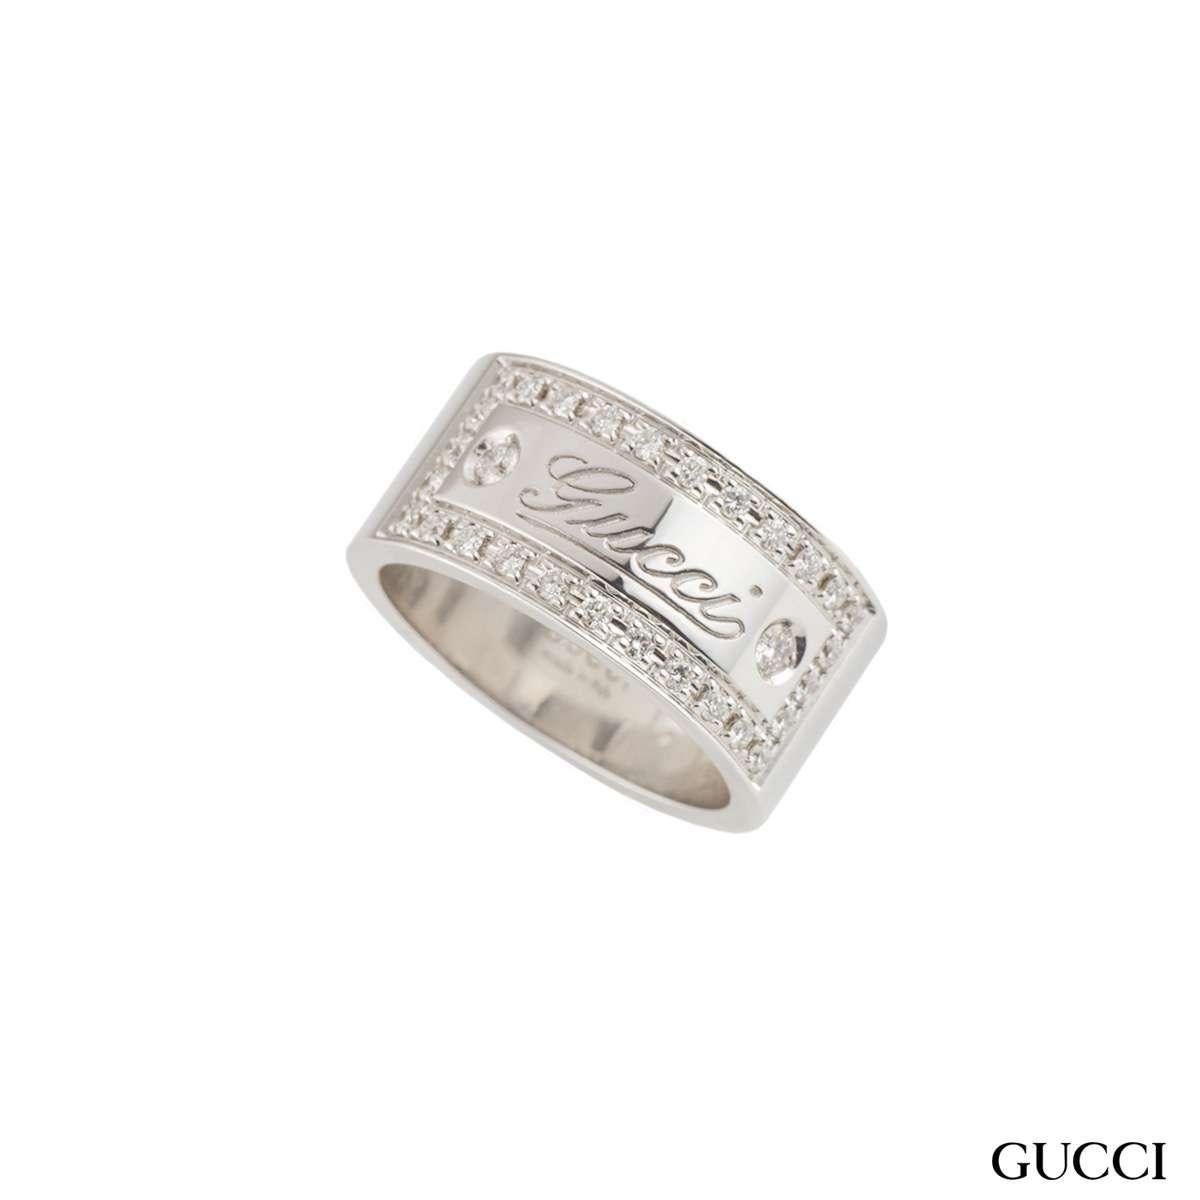 Gucci White Gold Diamond Band Ring In Excellent Condition For Sale In London, GB